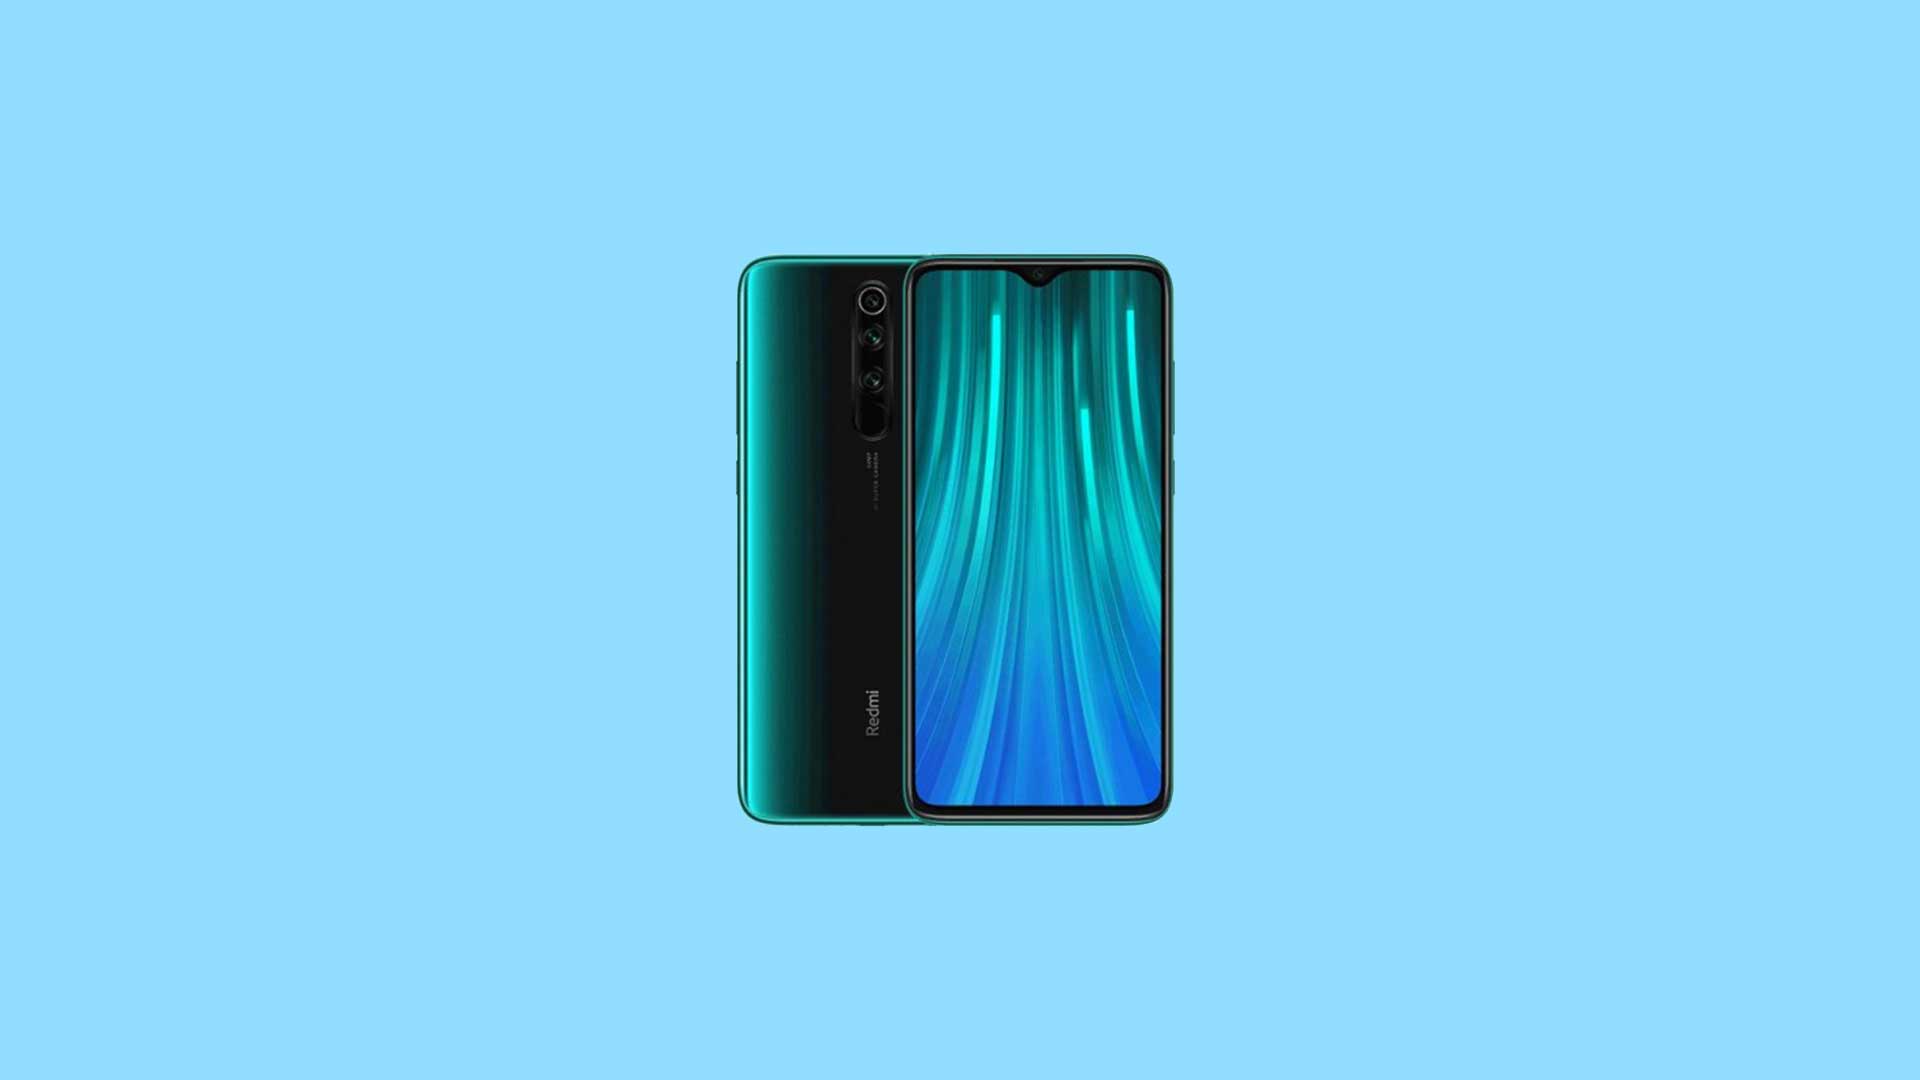 How to Install Official TWRP Recovery on Redmi Note 8T and Root it